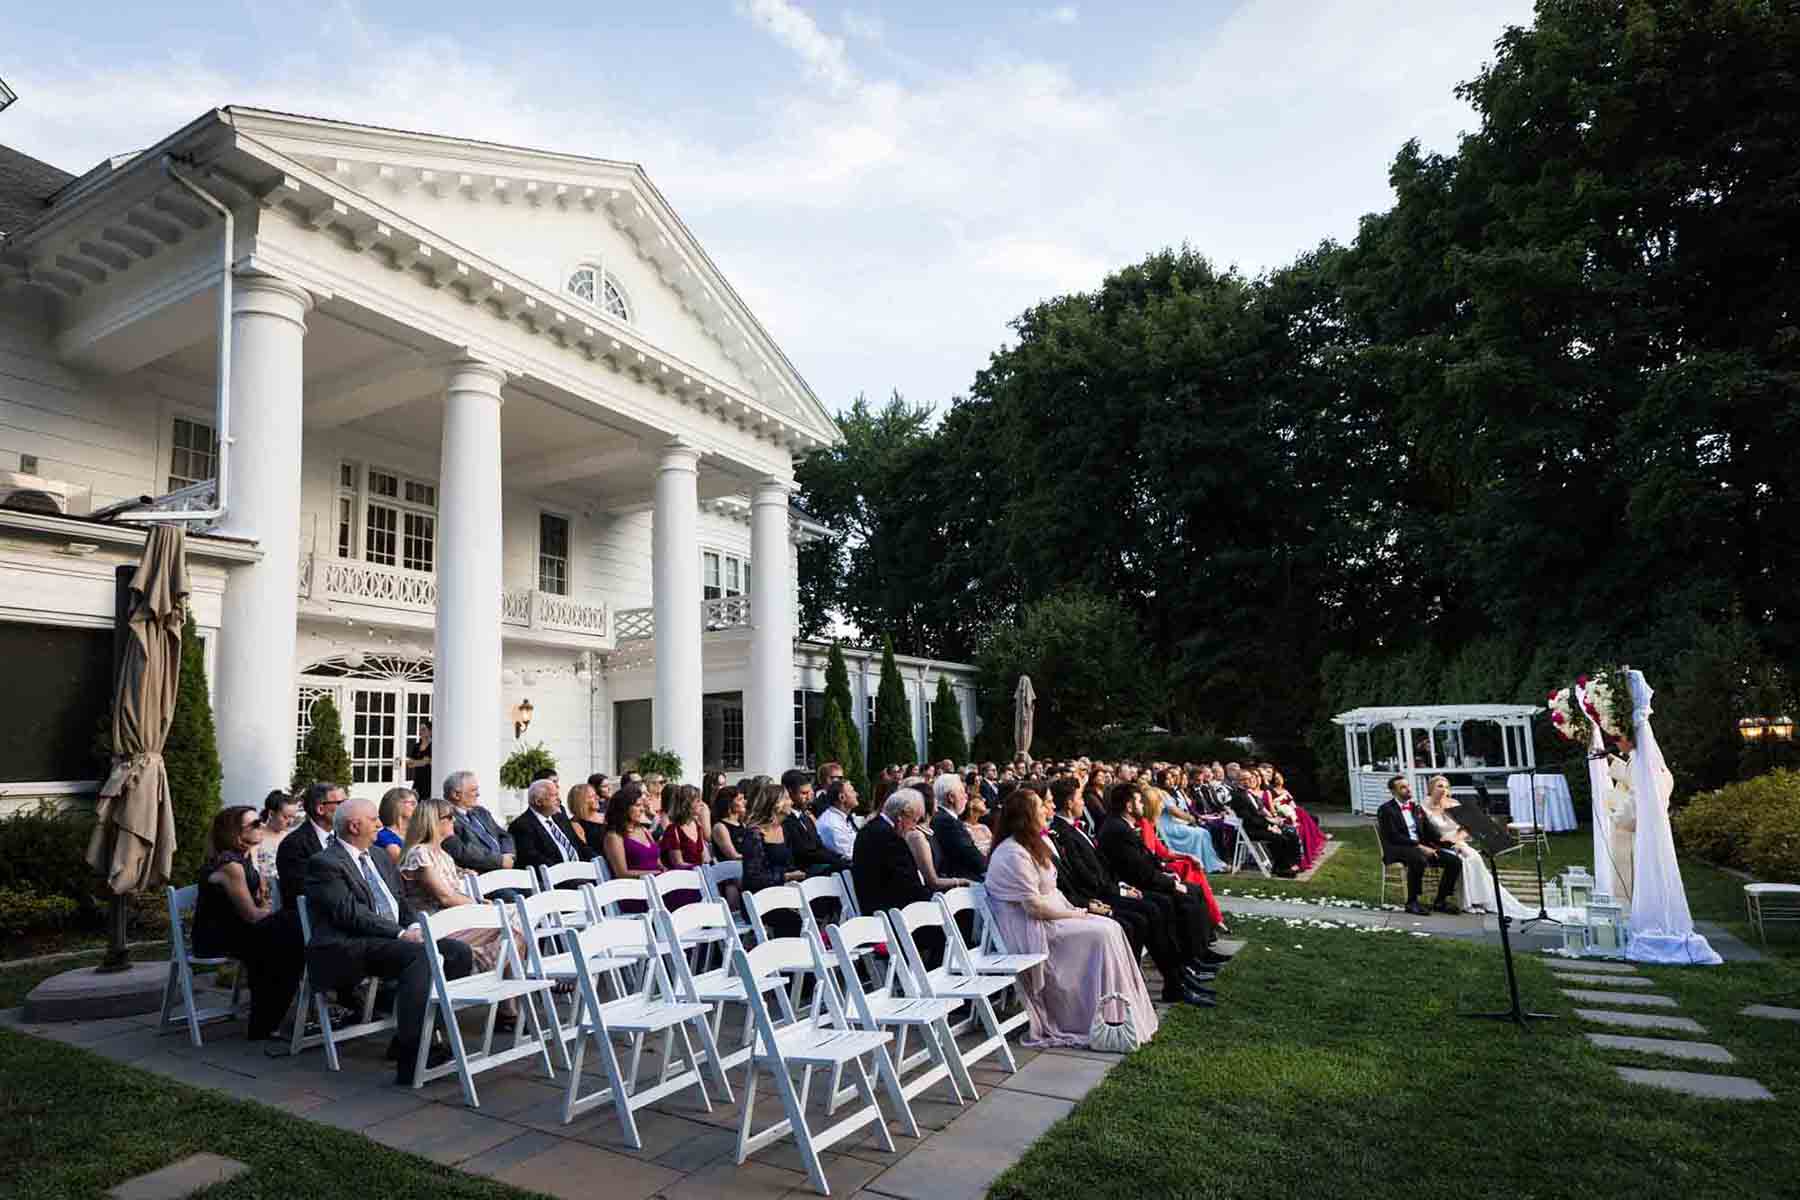 Wedding ceremony outdoors in front of historical white house with columns at a Briarcliff Manor wedding